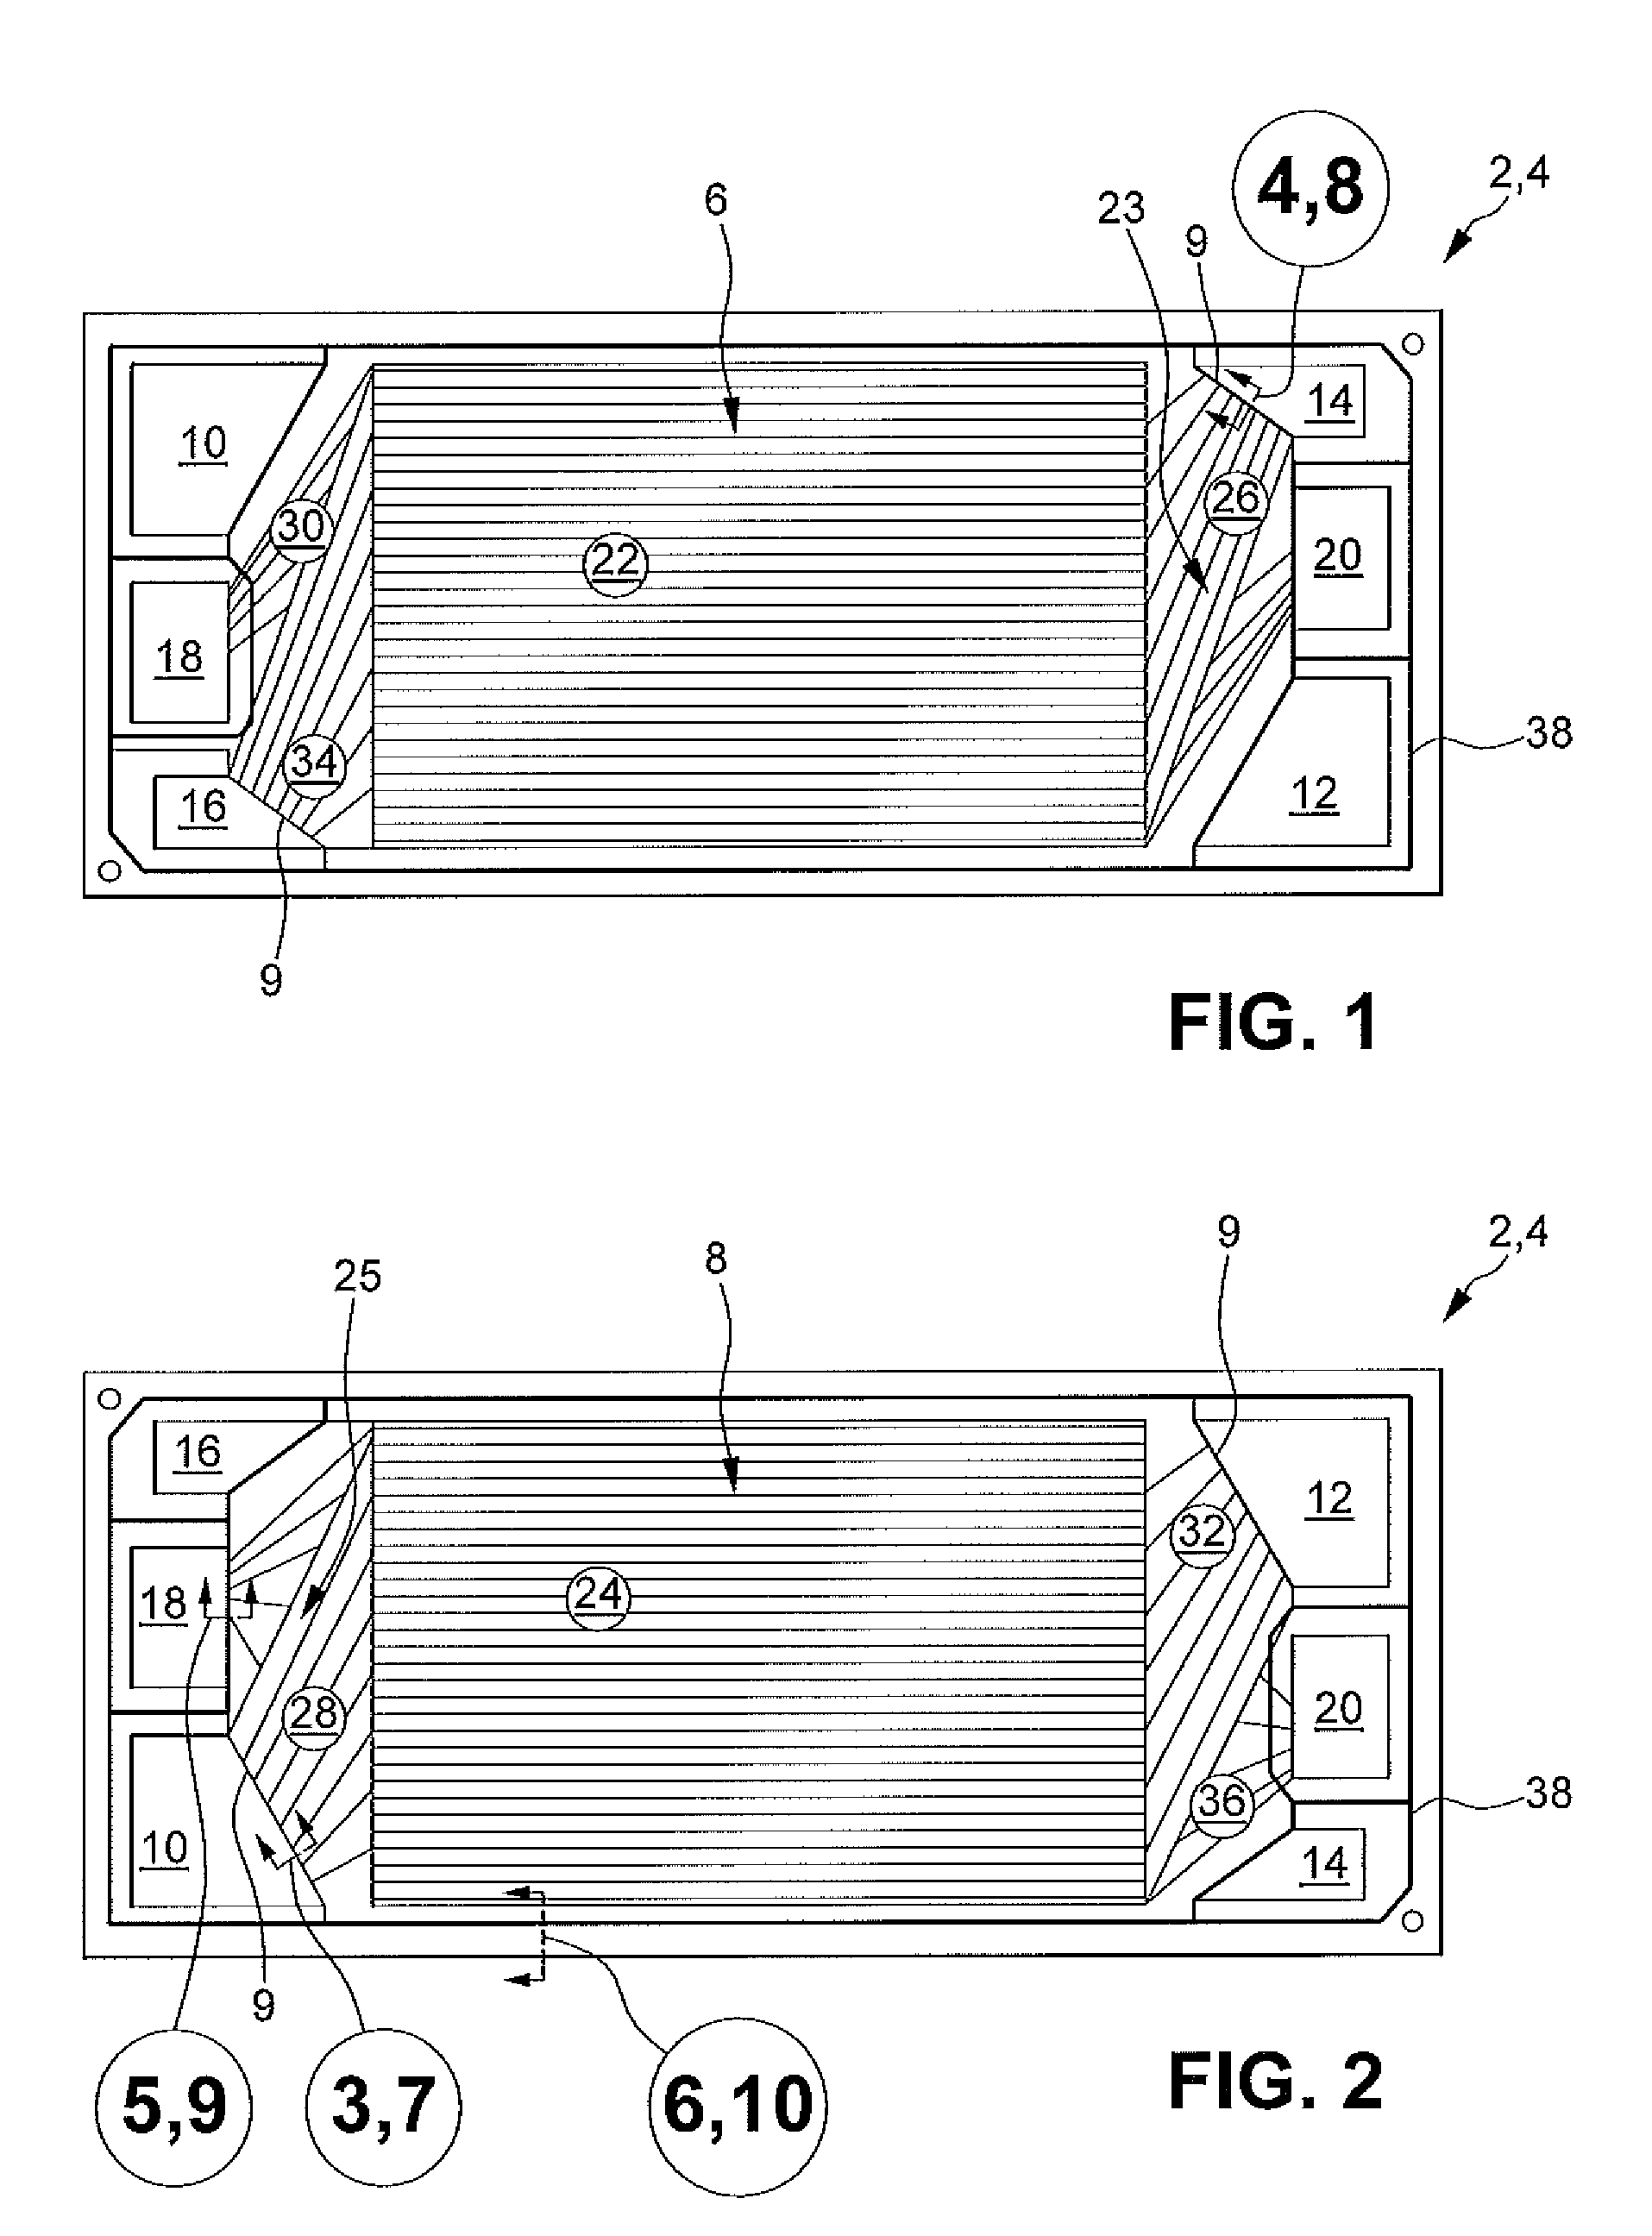 Conductive porous spacers for nested stamped plate fuel cell